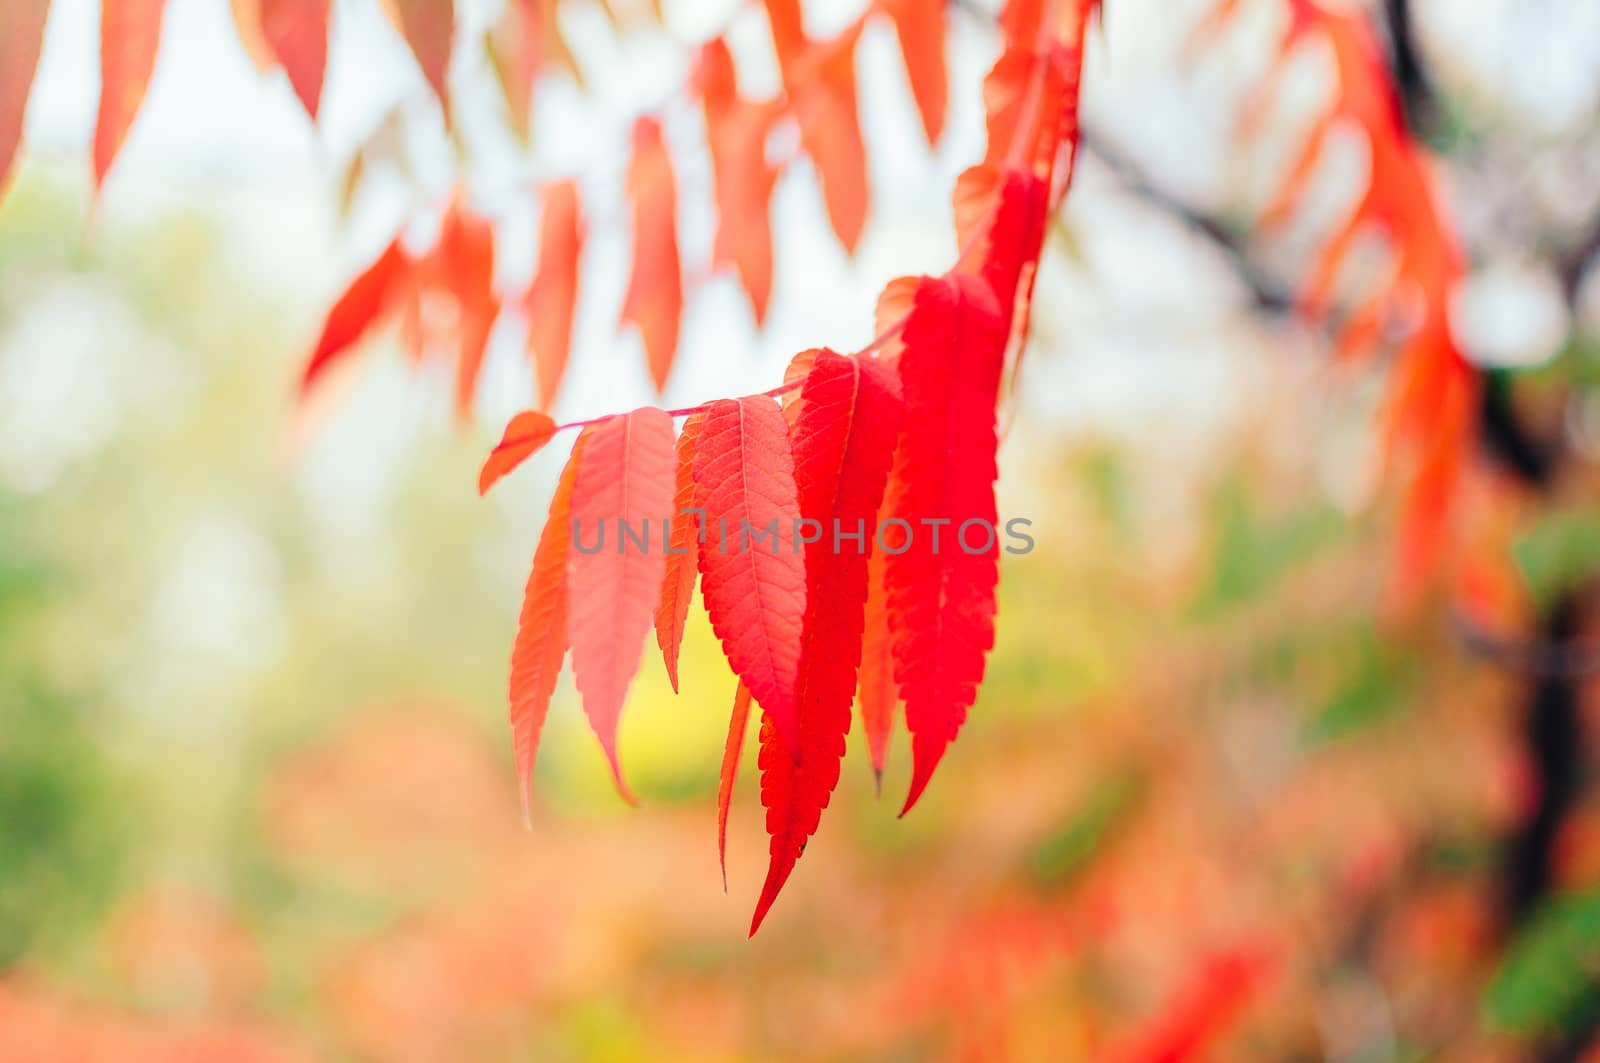 beautiful autumn leaves of red color close-up. Autumn landscape background. Autumn abstract background with red leaves. Autumn nature forest background for design. Copy space. by Alla_Morozova93